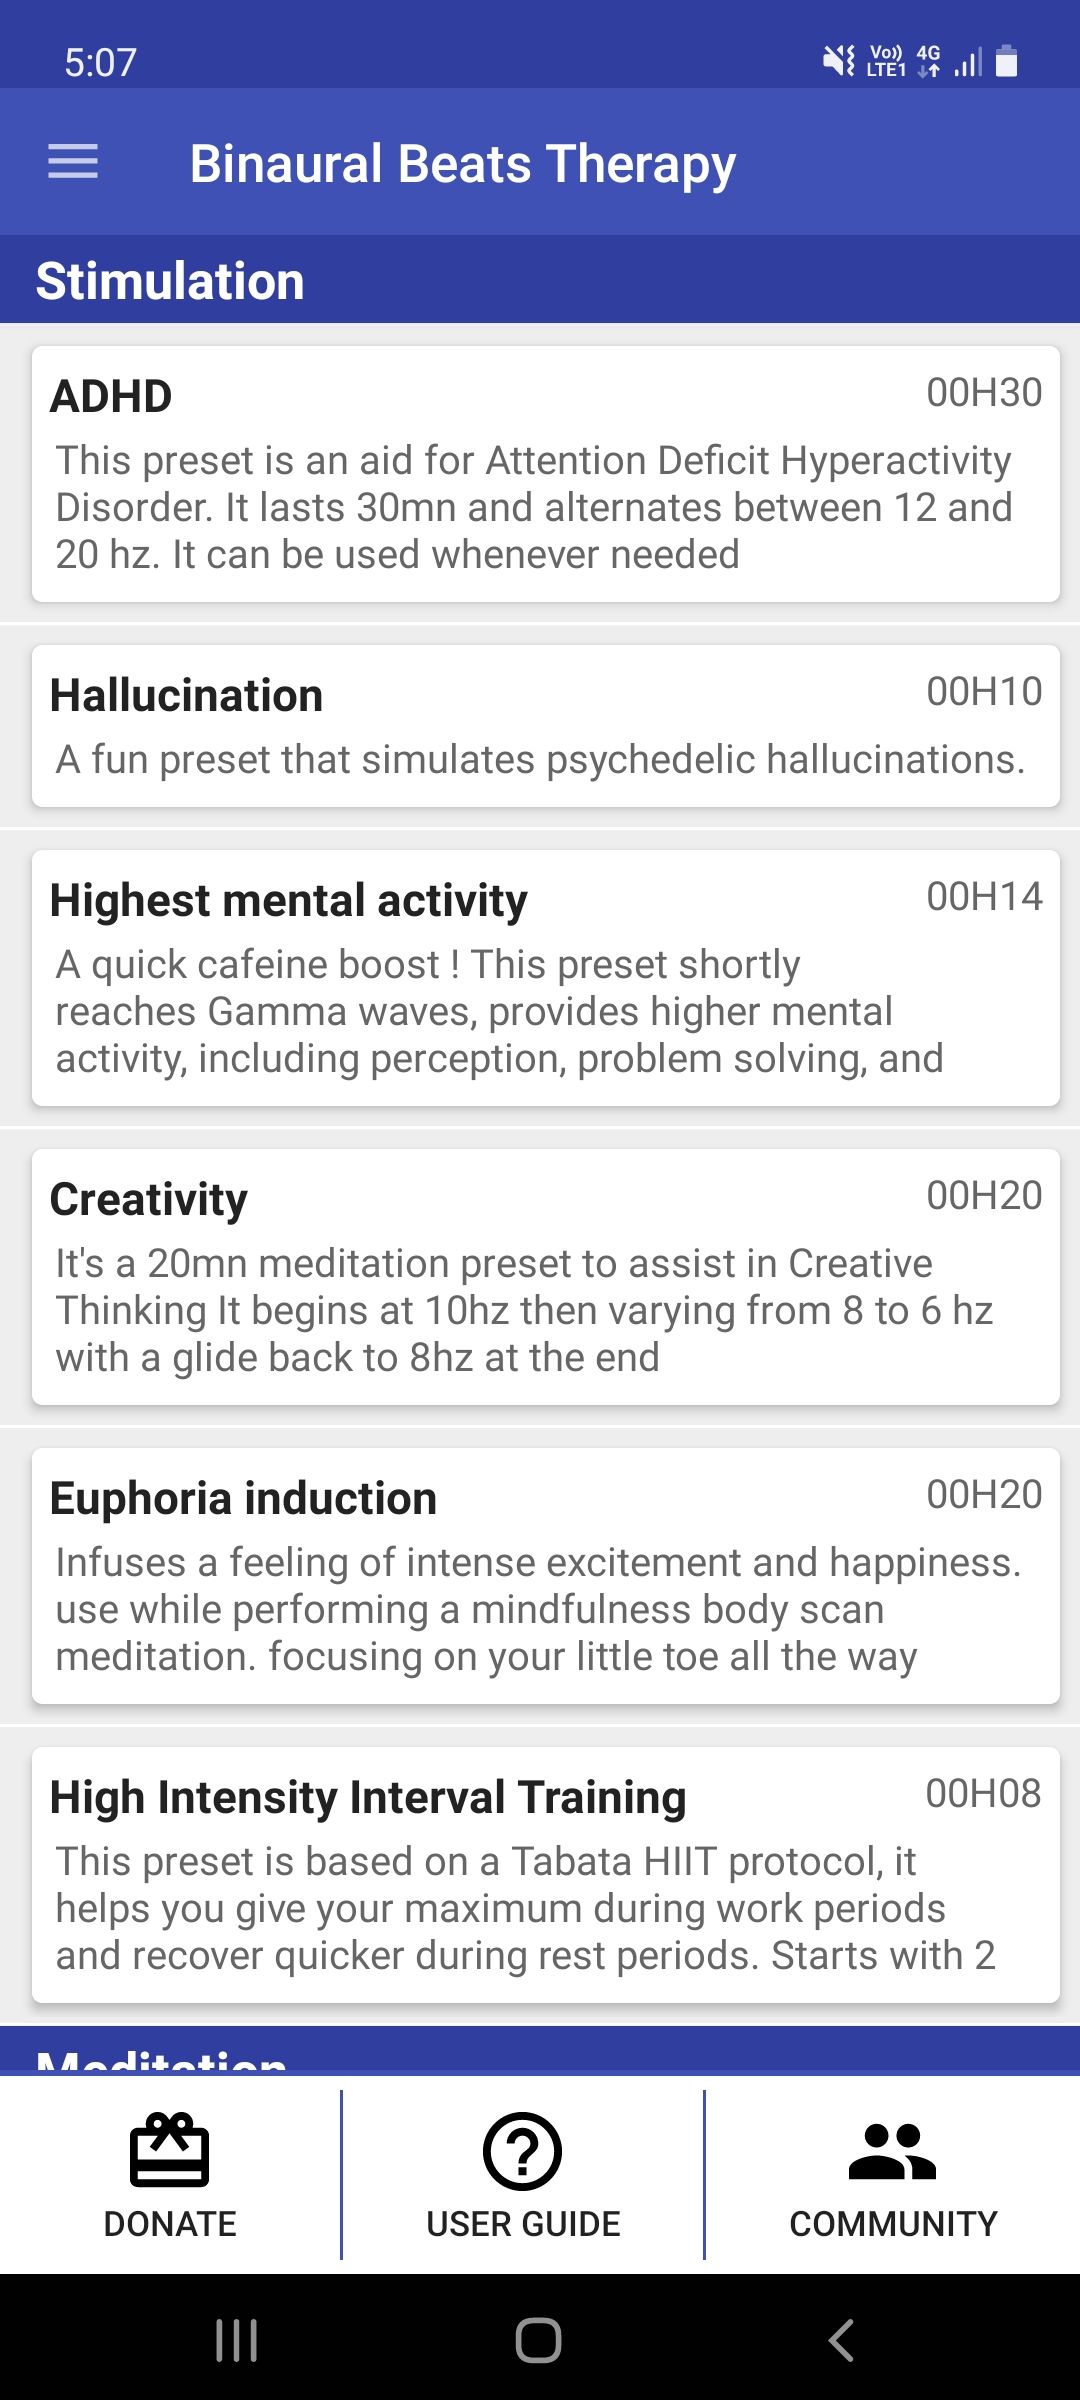 binaural beats therapy app home page